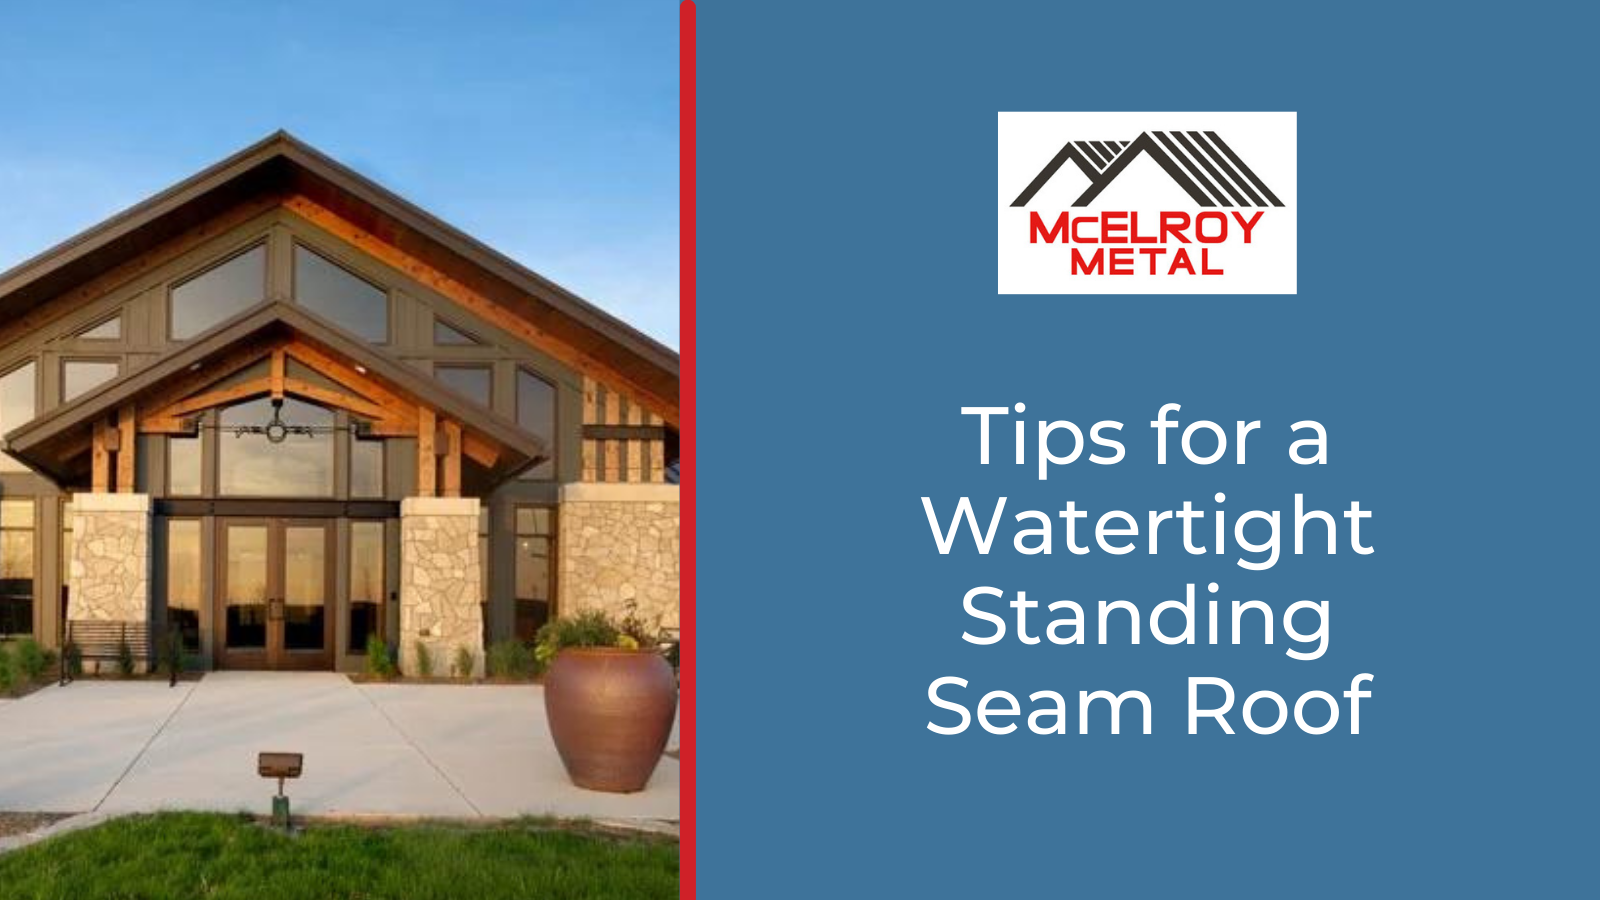 Tips for a Watertight Standing Seam Roof